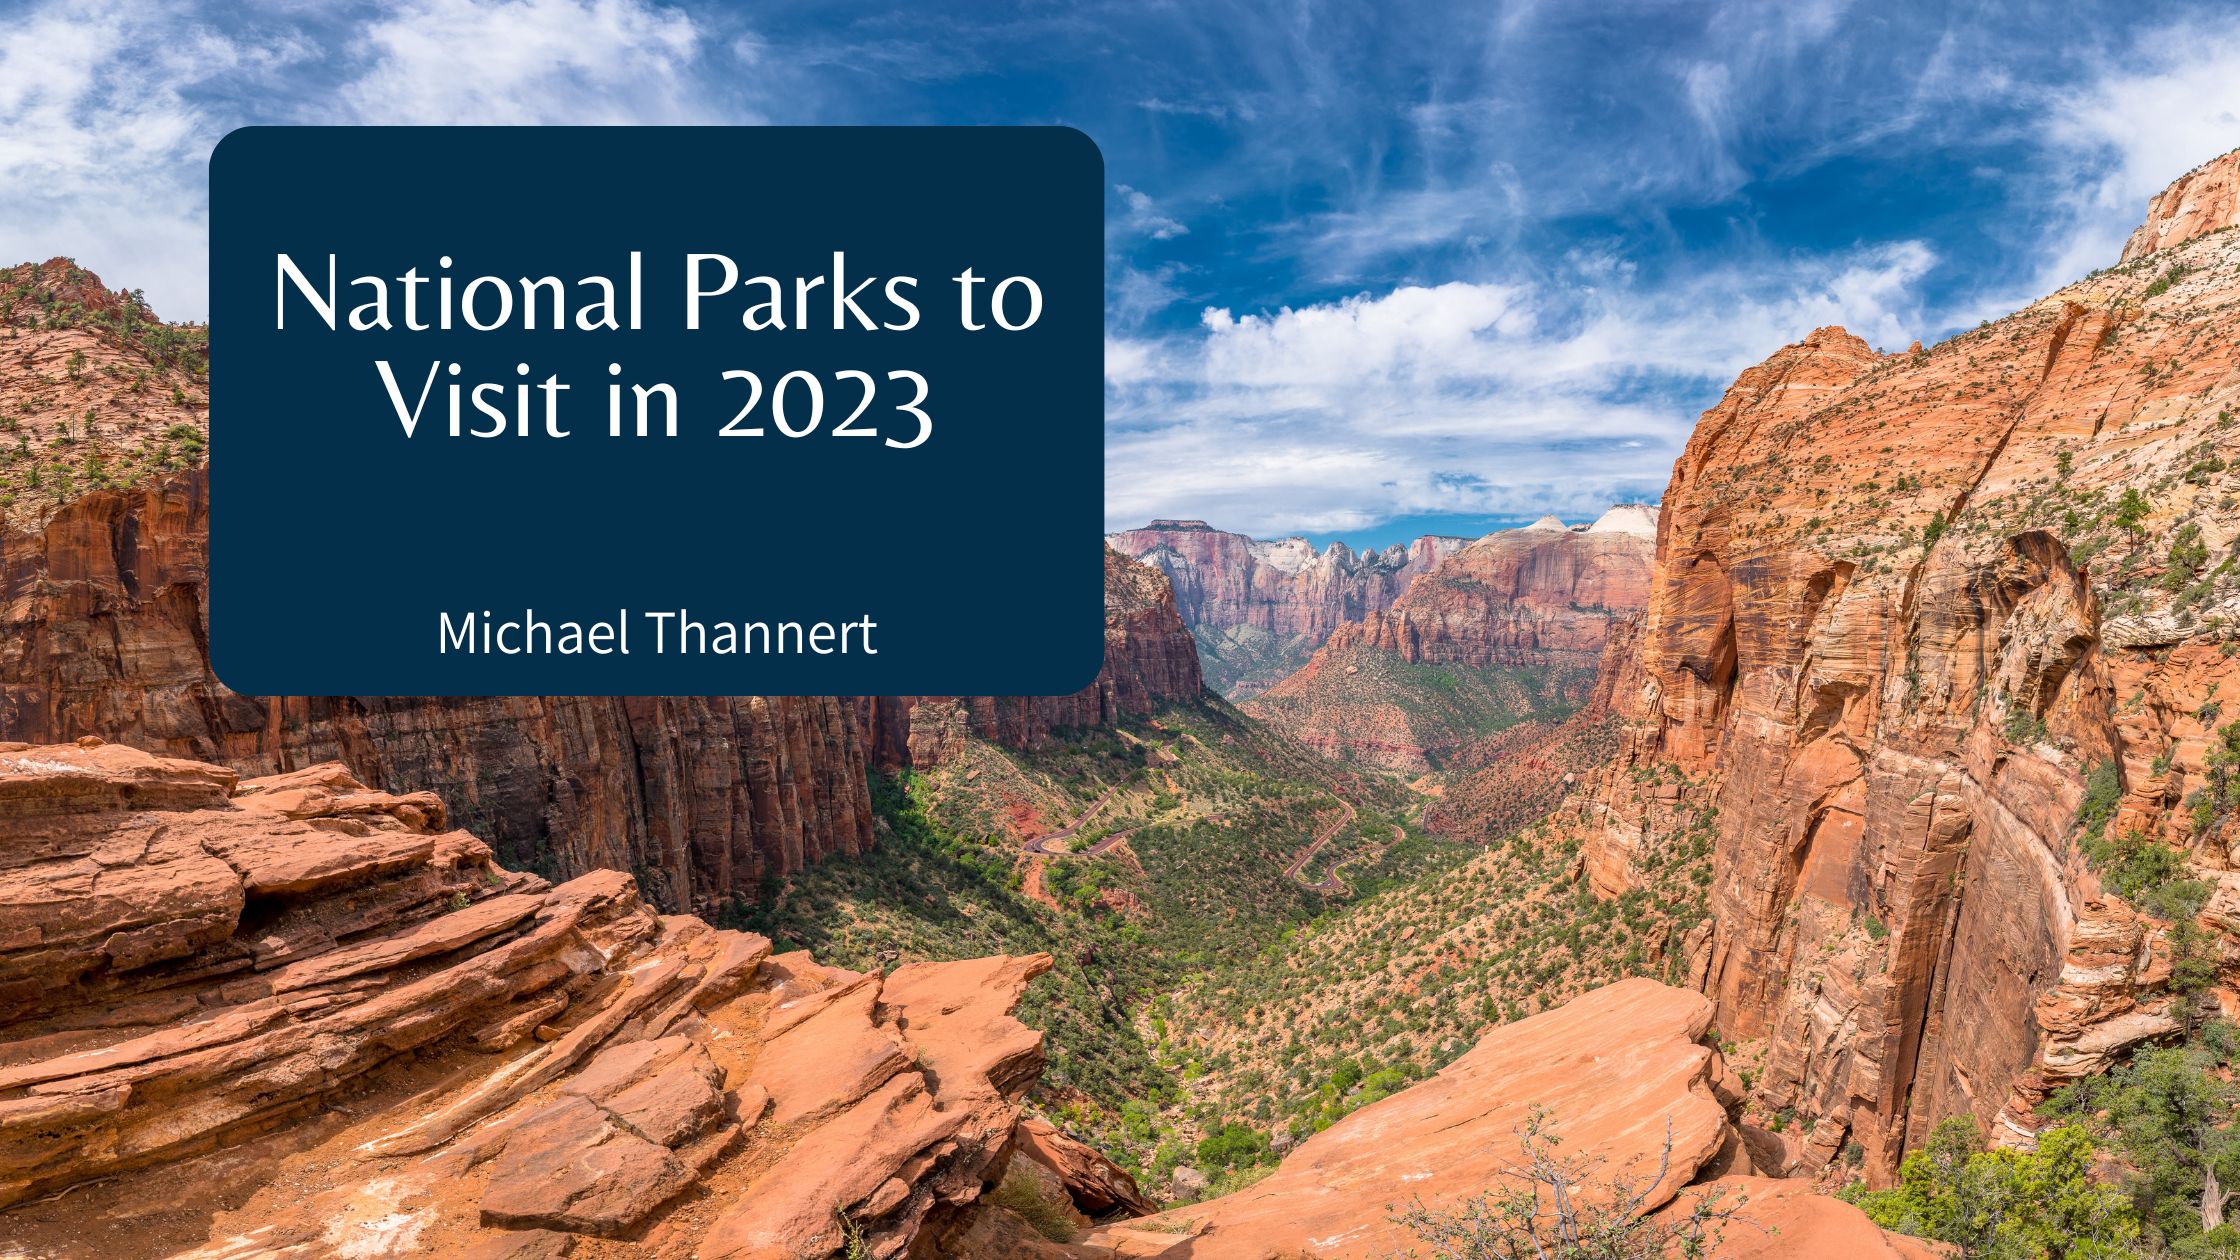 National Parks to Visit in 2023